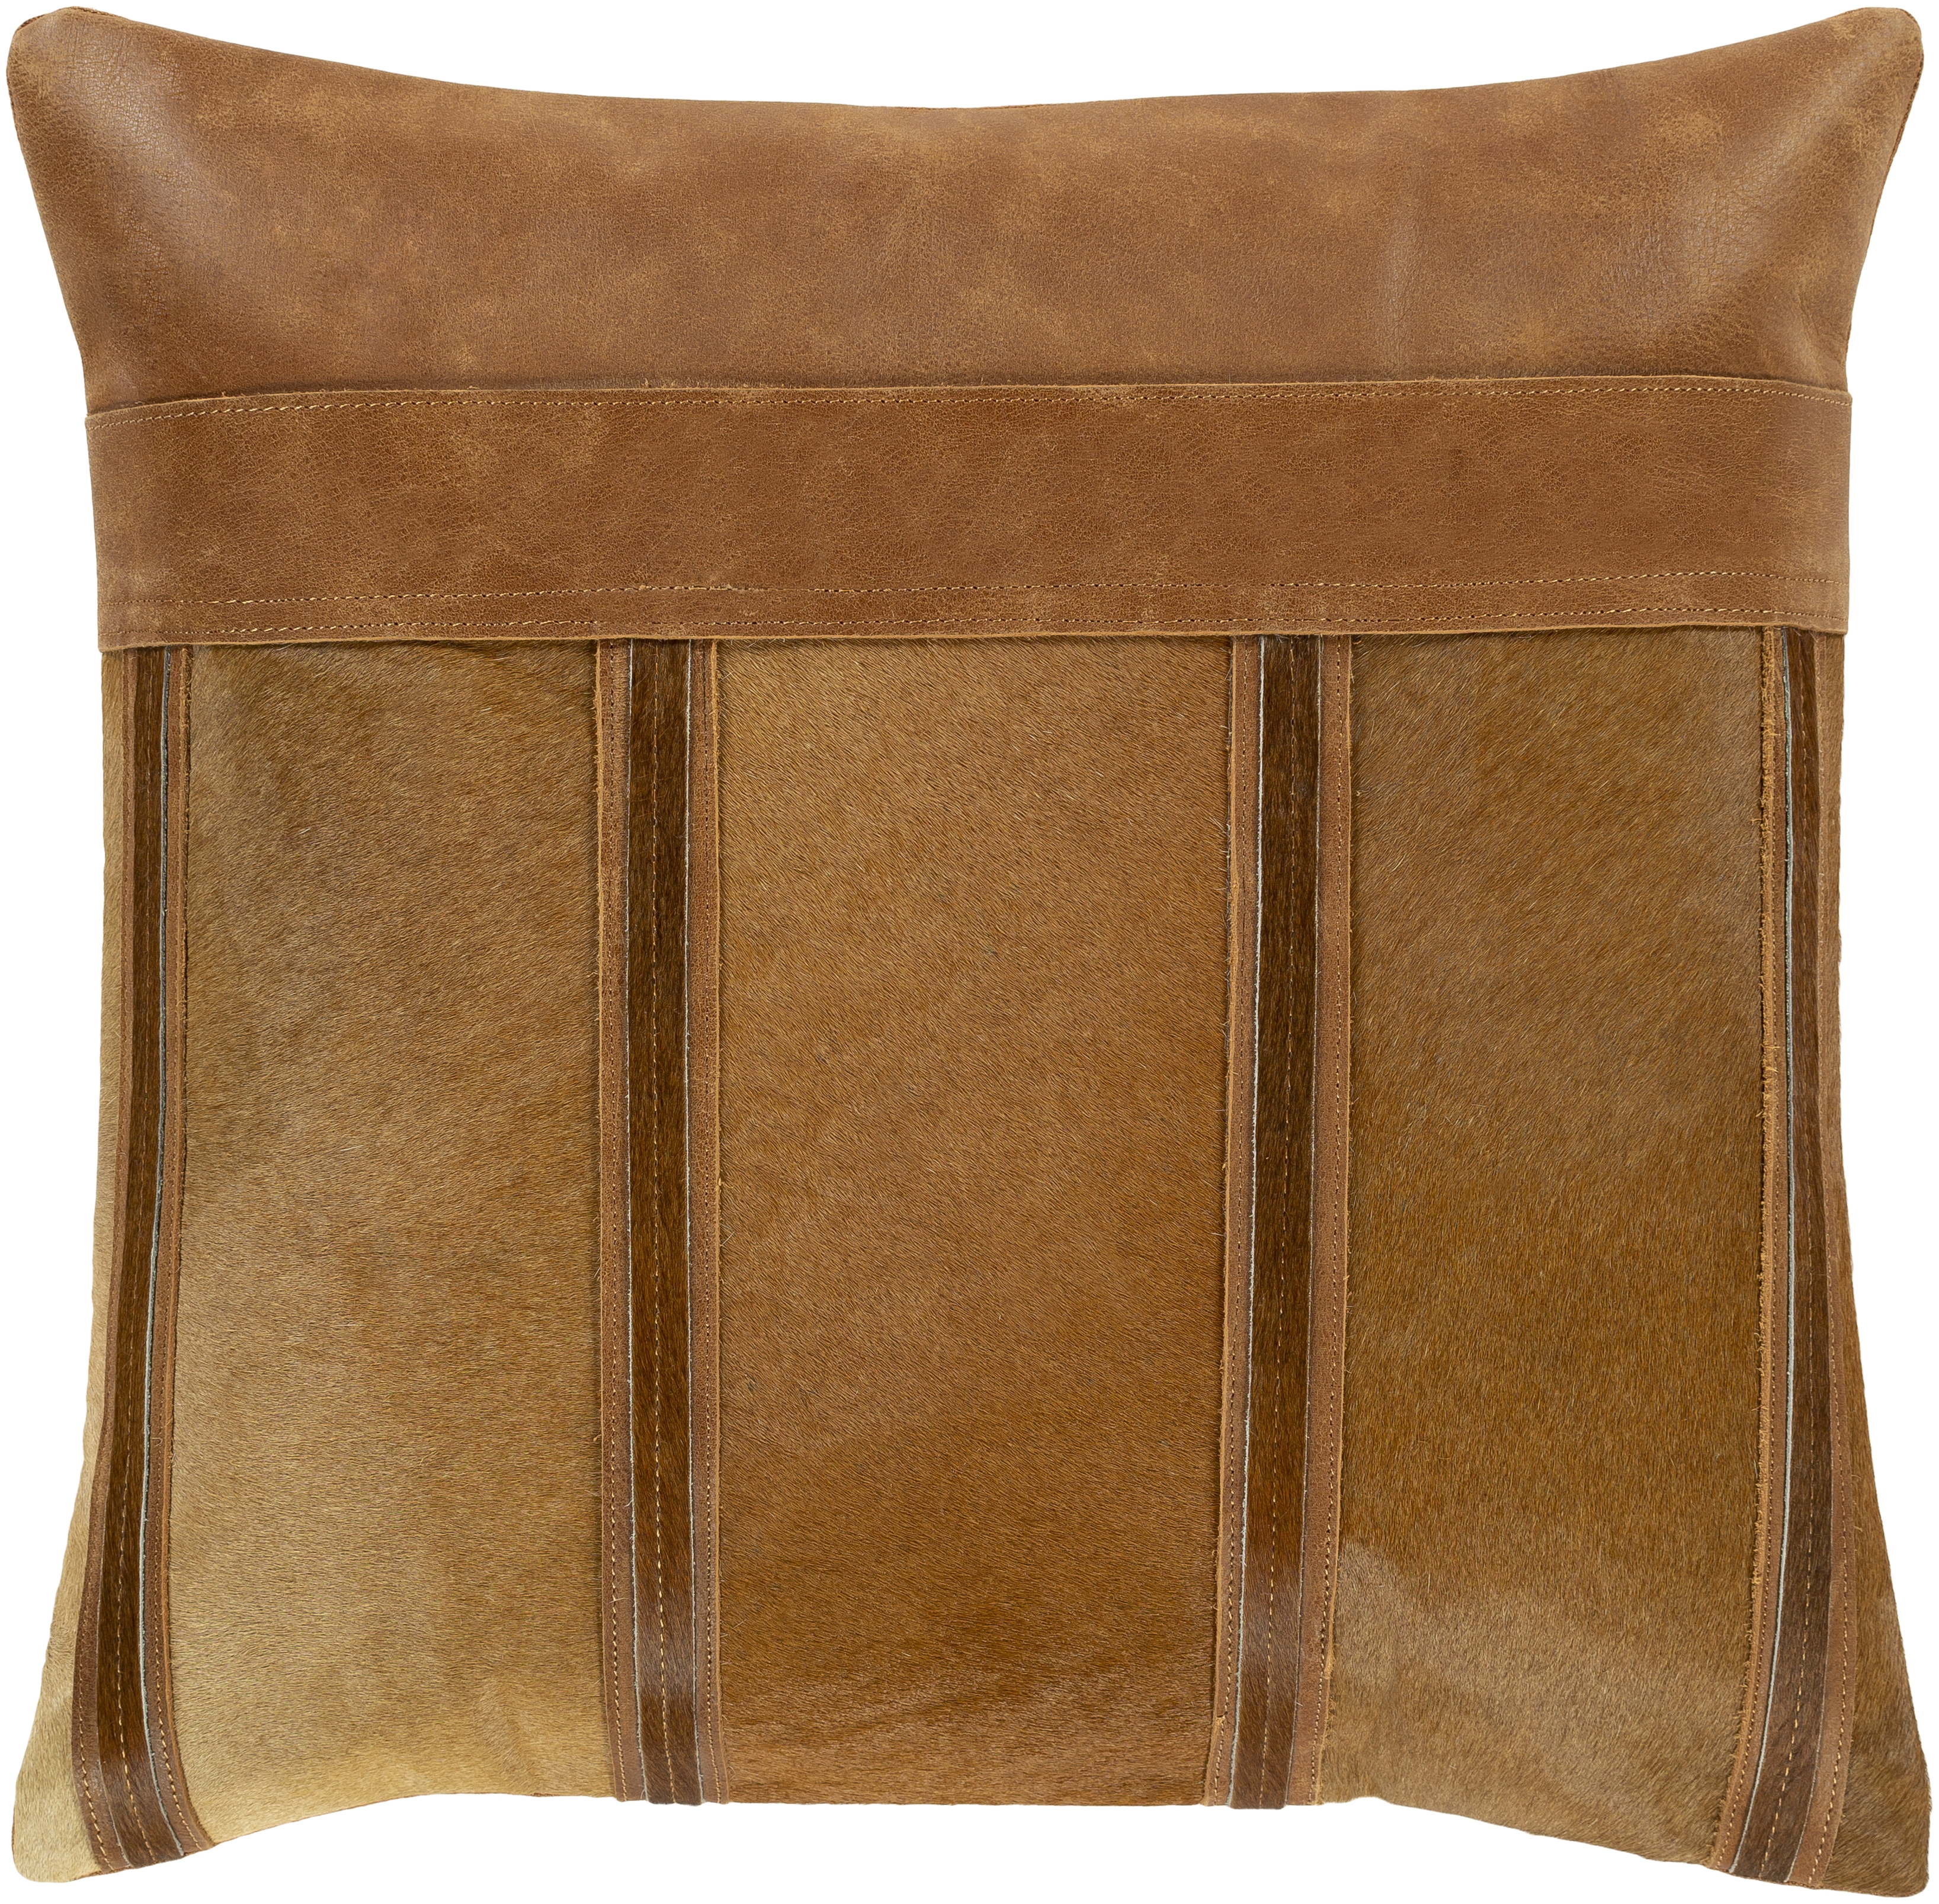 Knox-Old Throw Pillow, 18" x 18", with down insert - Image 0